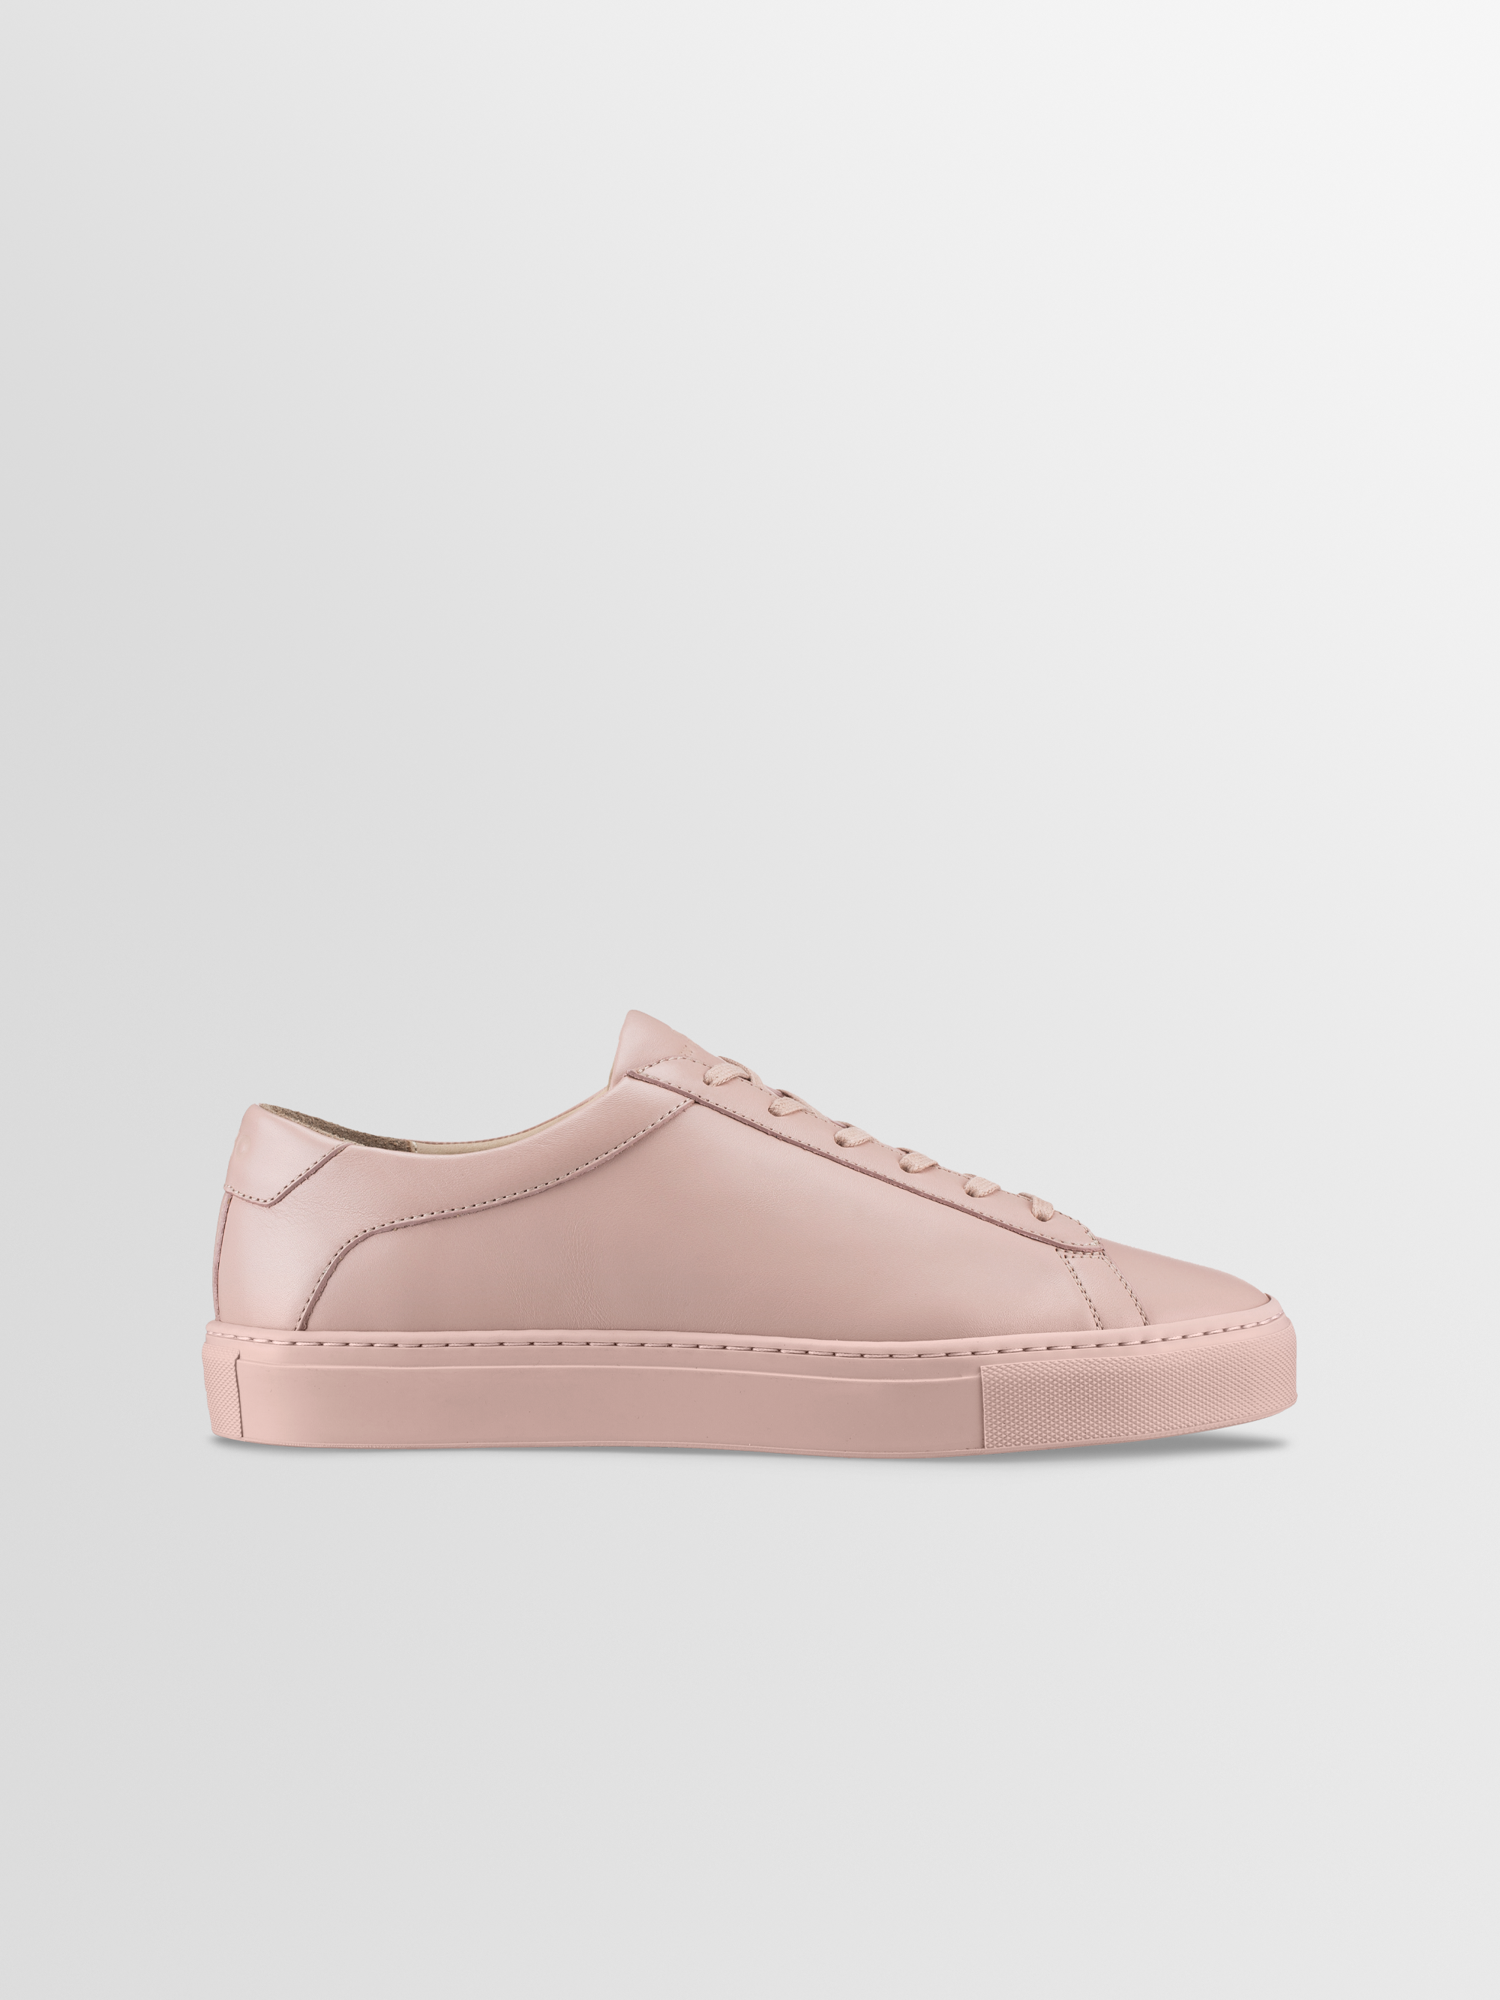 Buy Nike Air Force Pink Online In India - Etsy India